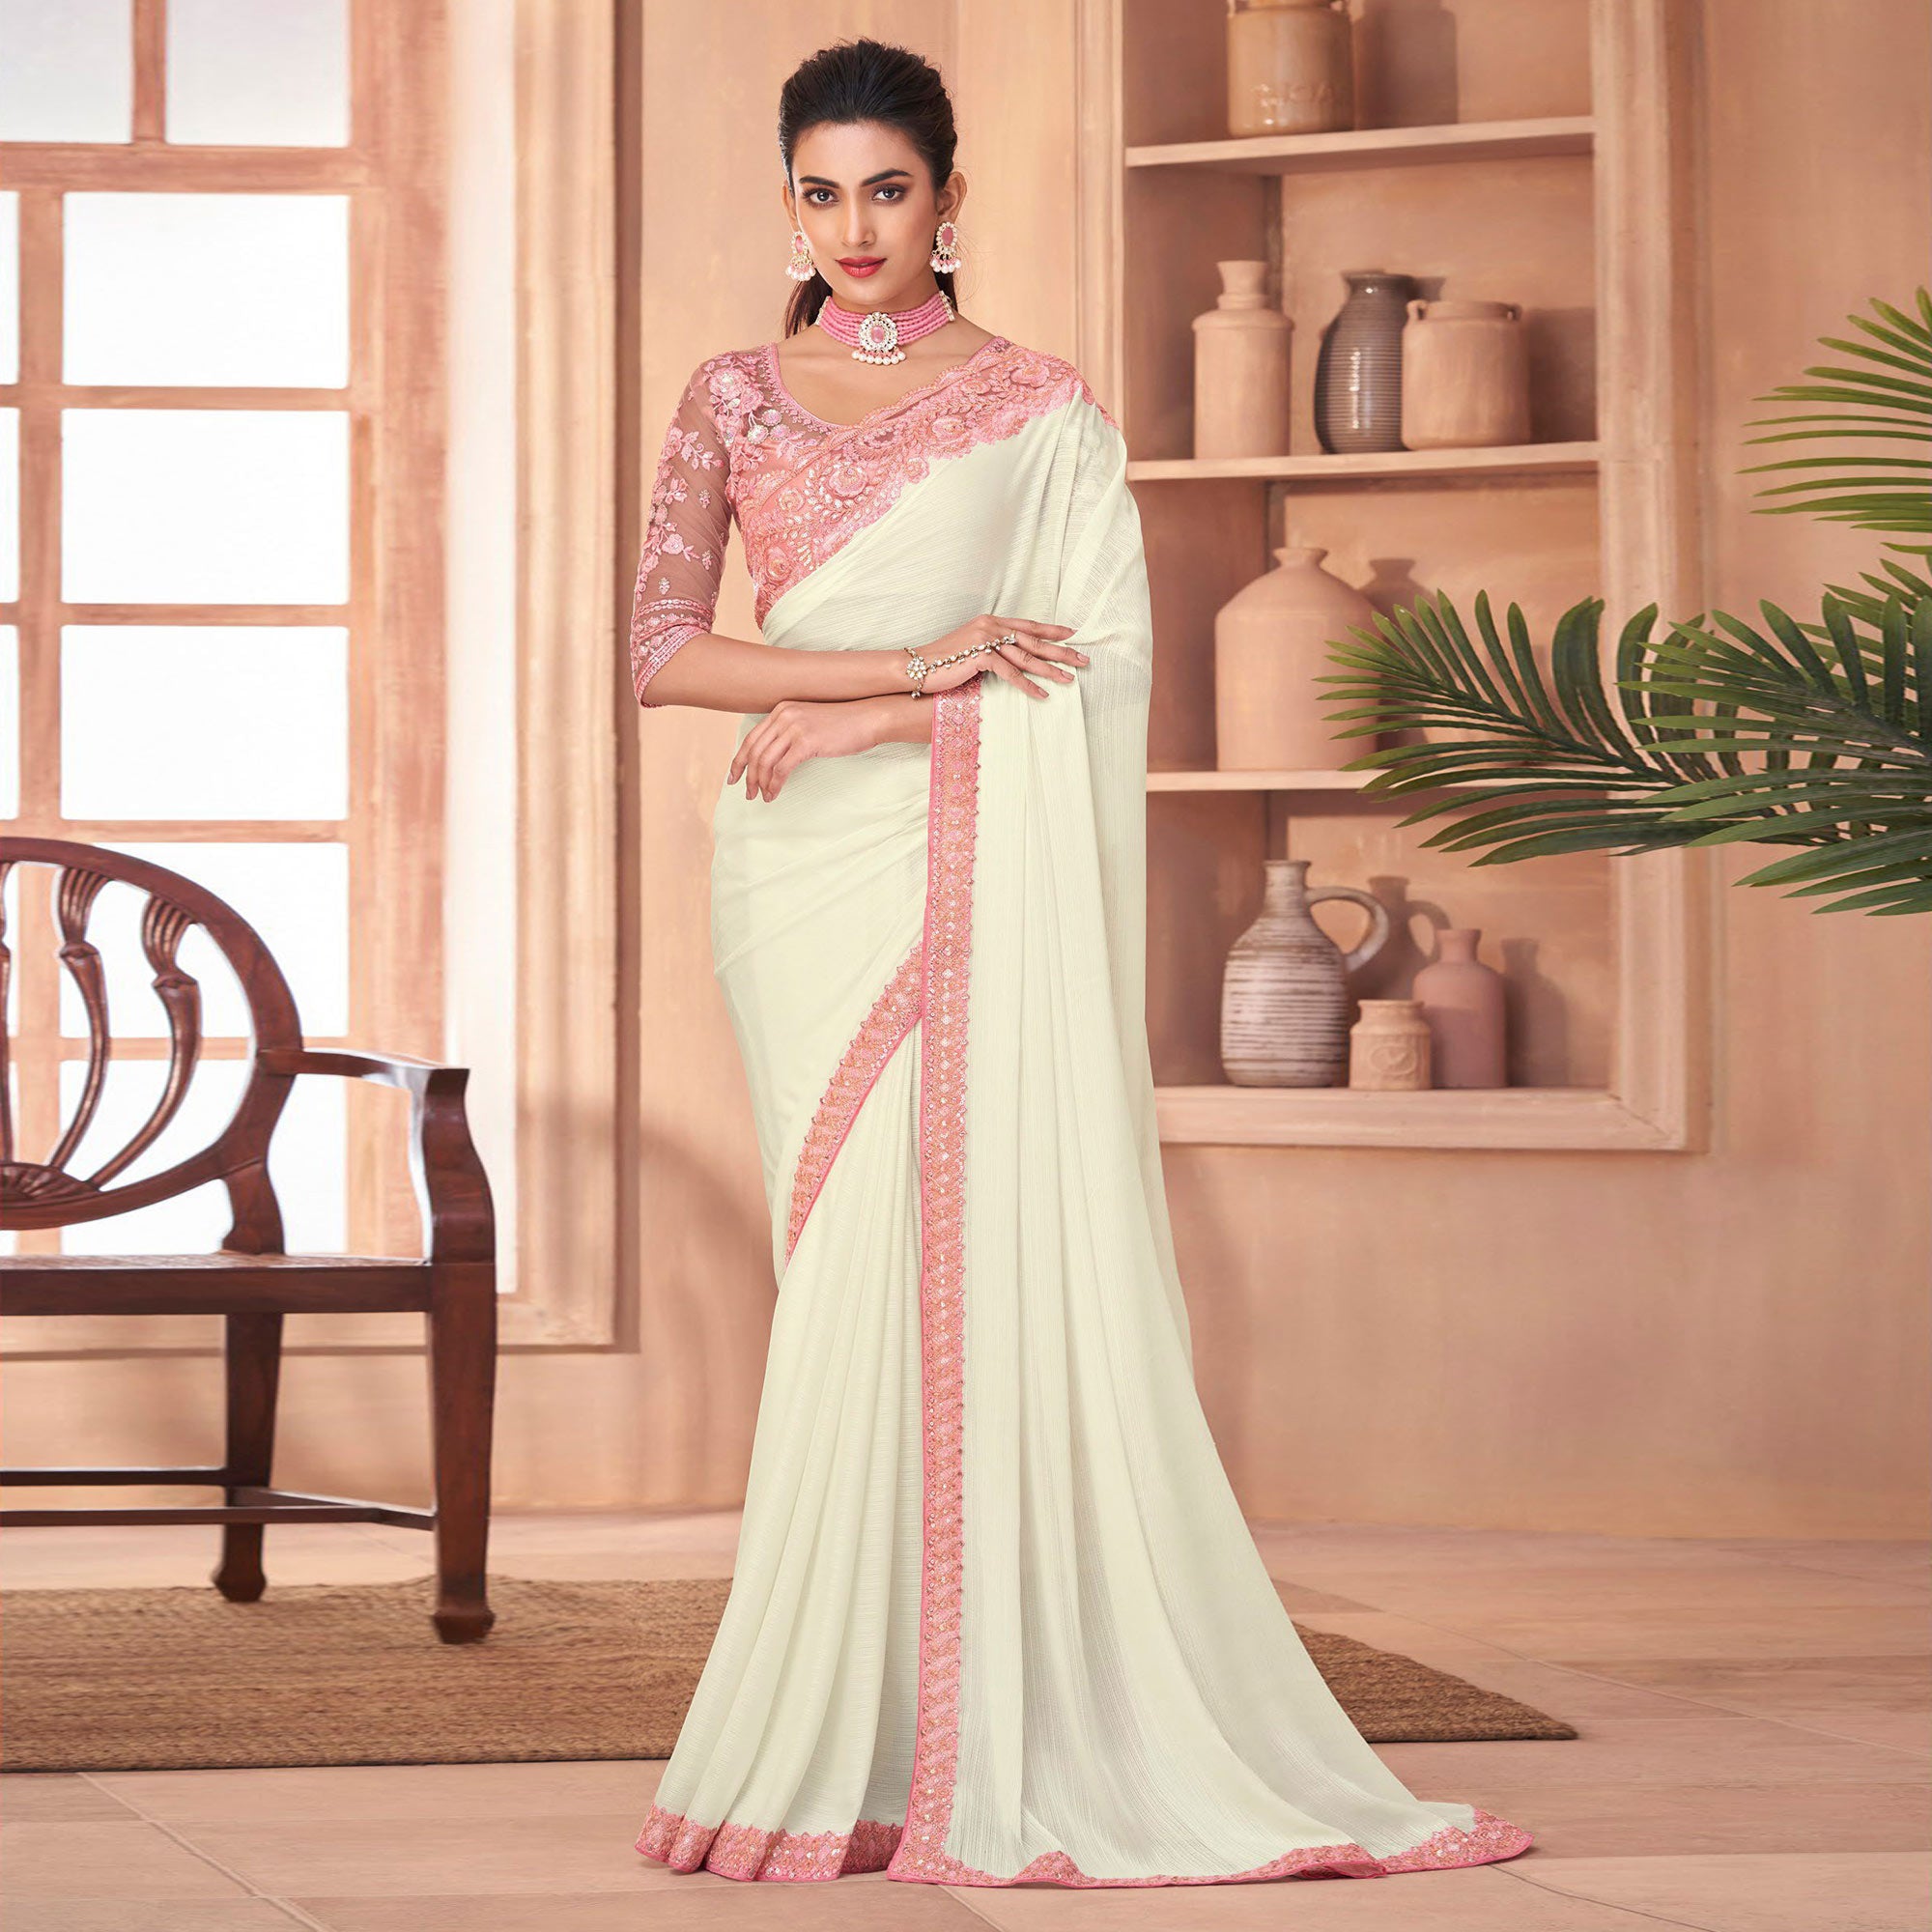 Off White Floral Embroidered Georgette Saree